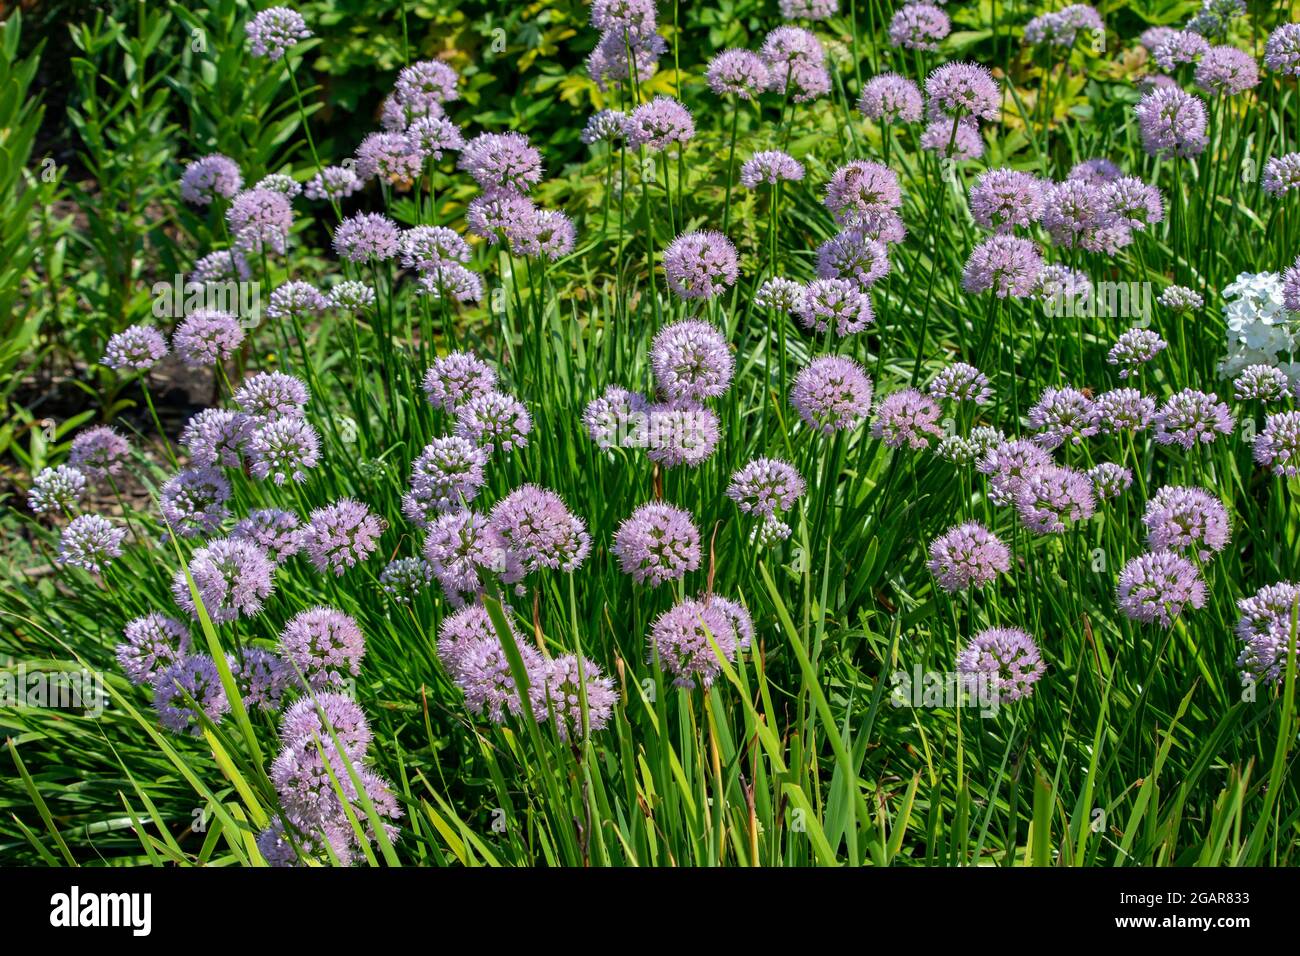 Close-up view of beautiful pink prairie onion flowers (allium stellatum) blooming in a sunny ornamental garden Stock Photo